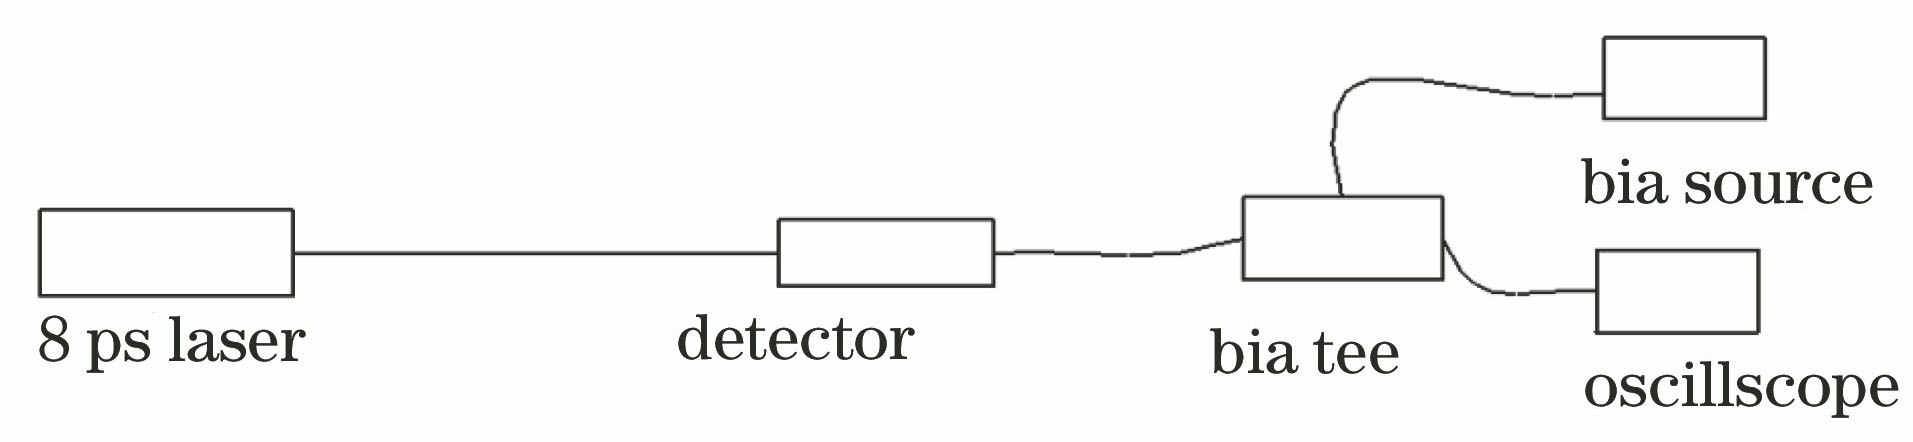 Schematic for the temporal performance test of diamond detector